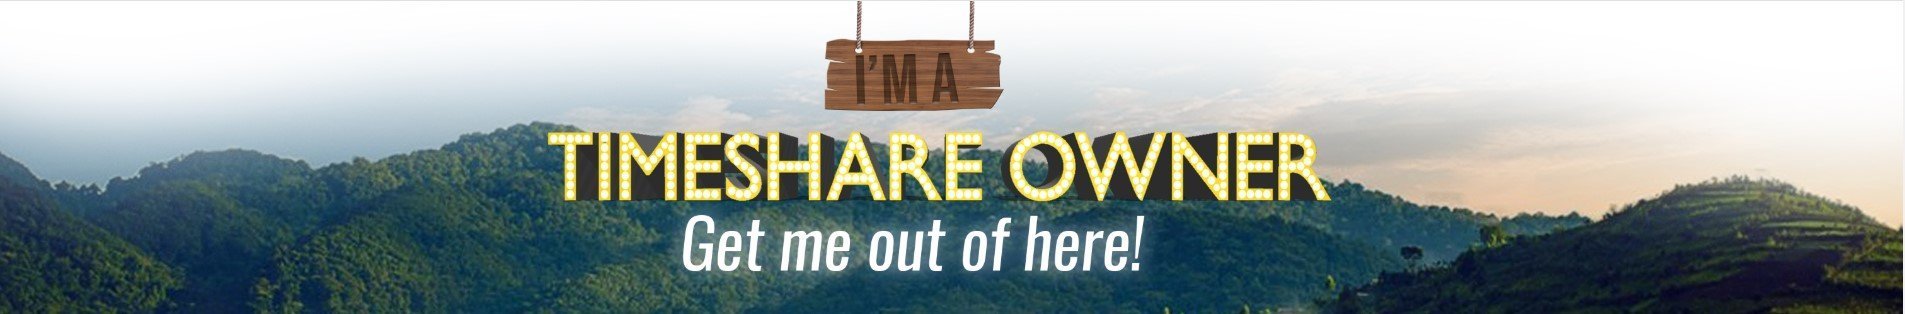 timeshare-owner-get-me-out-of-here